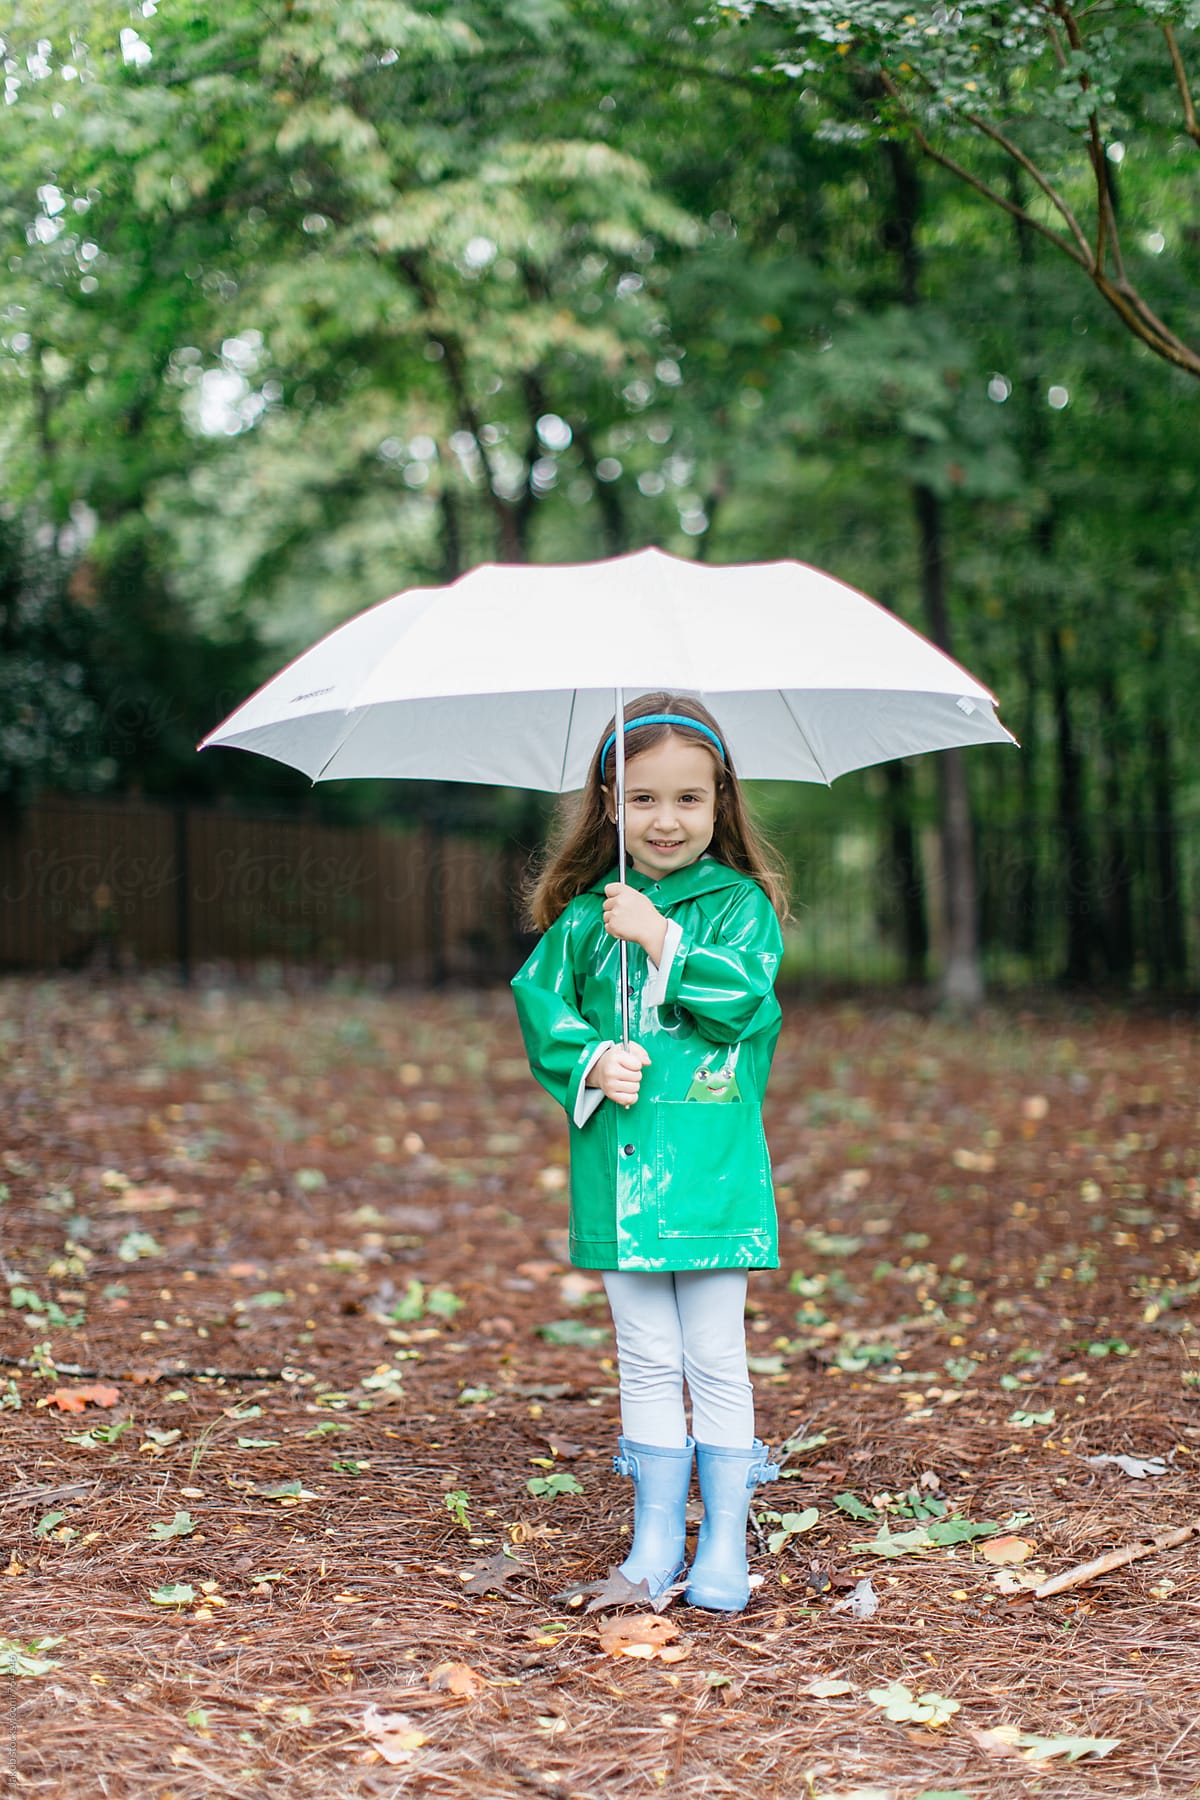 Cute young toddler with an umbrella and raincoat